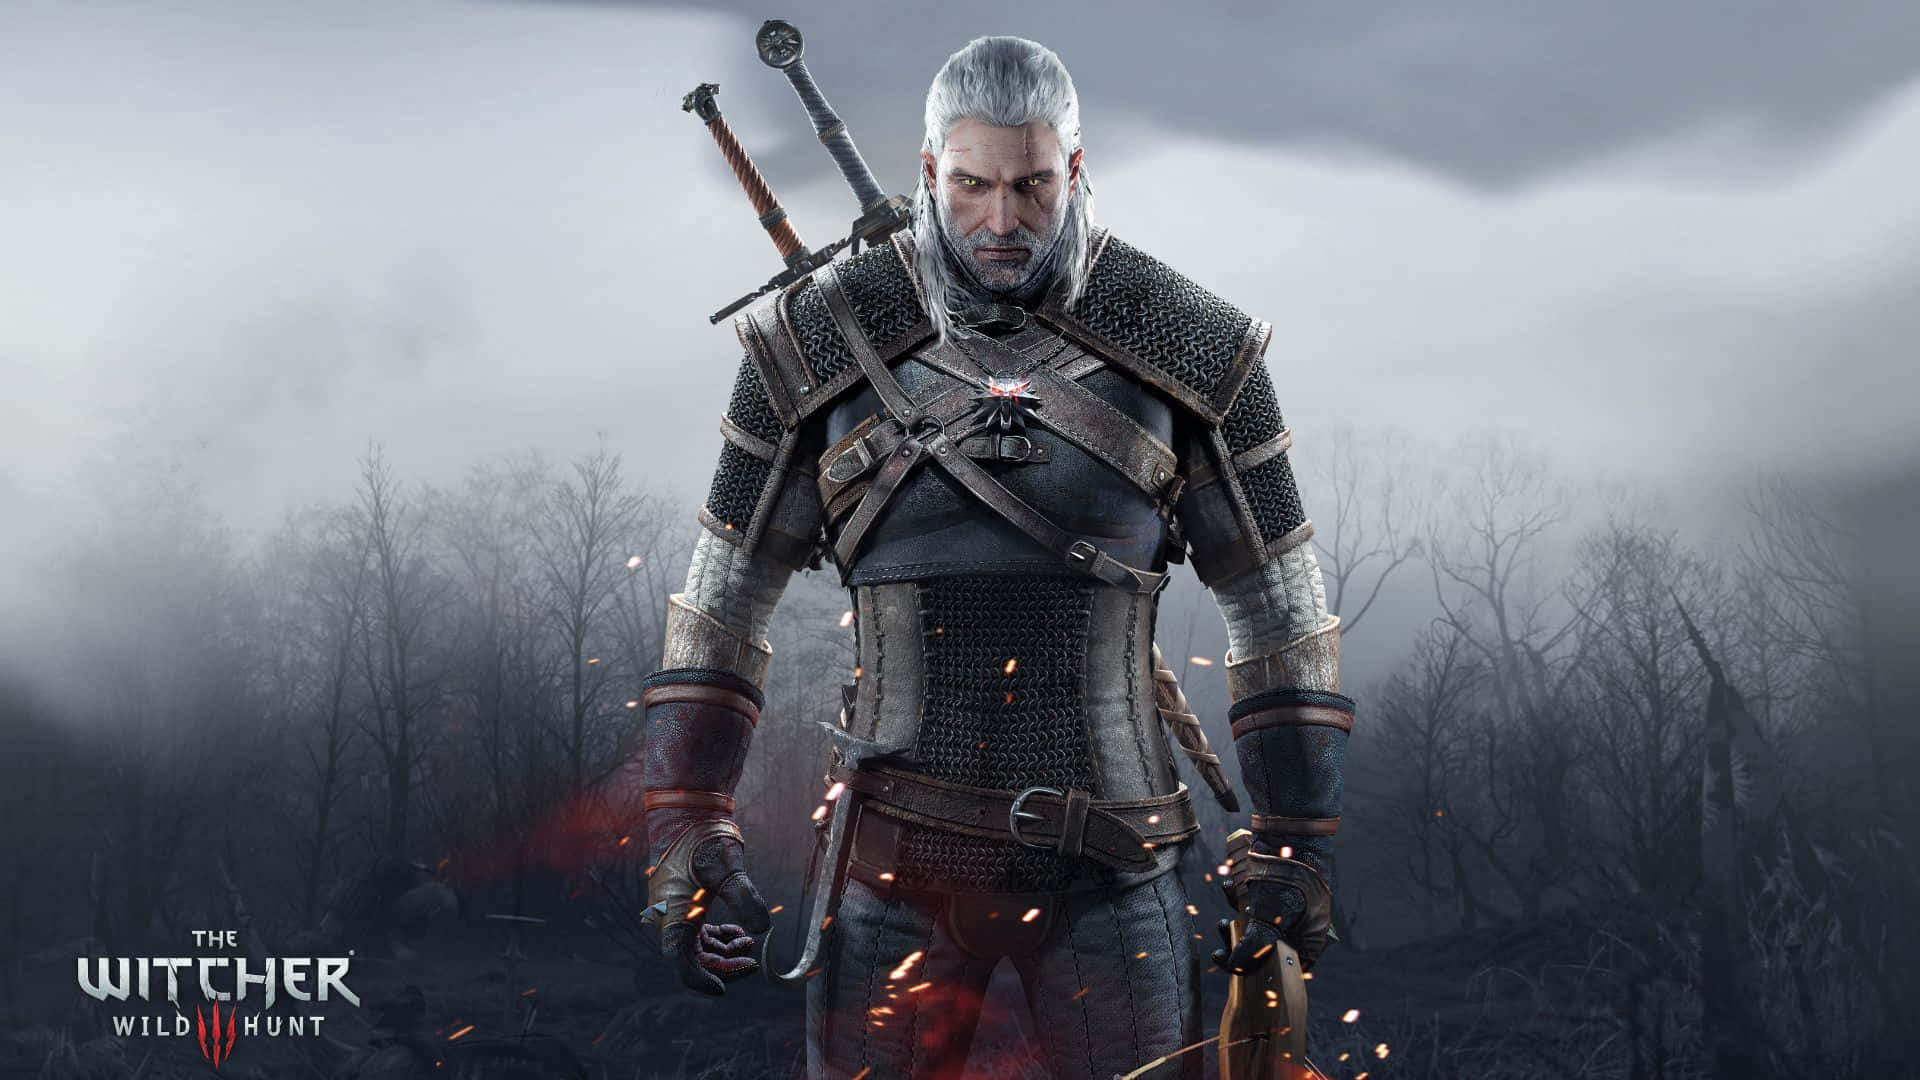 “Experience a world filled with epic adventures in The Witcher 3.”